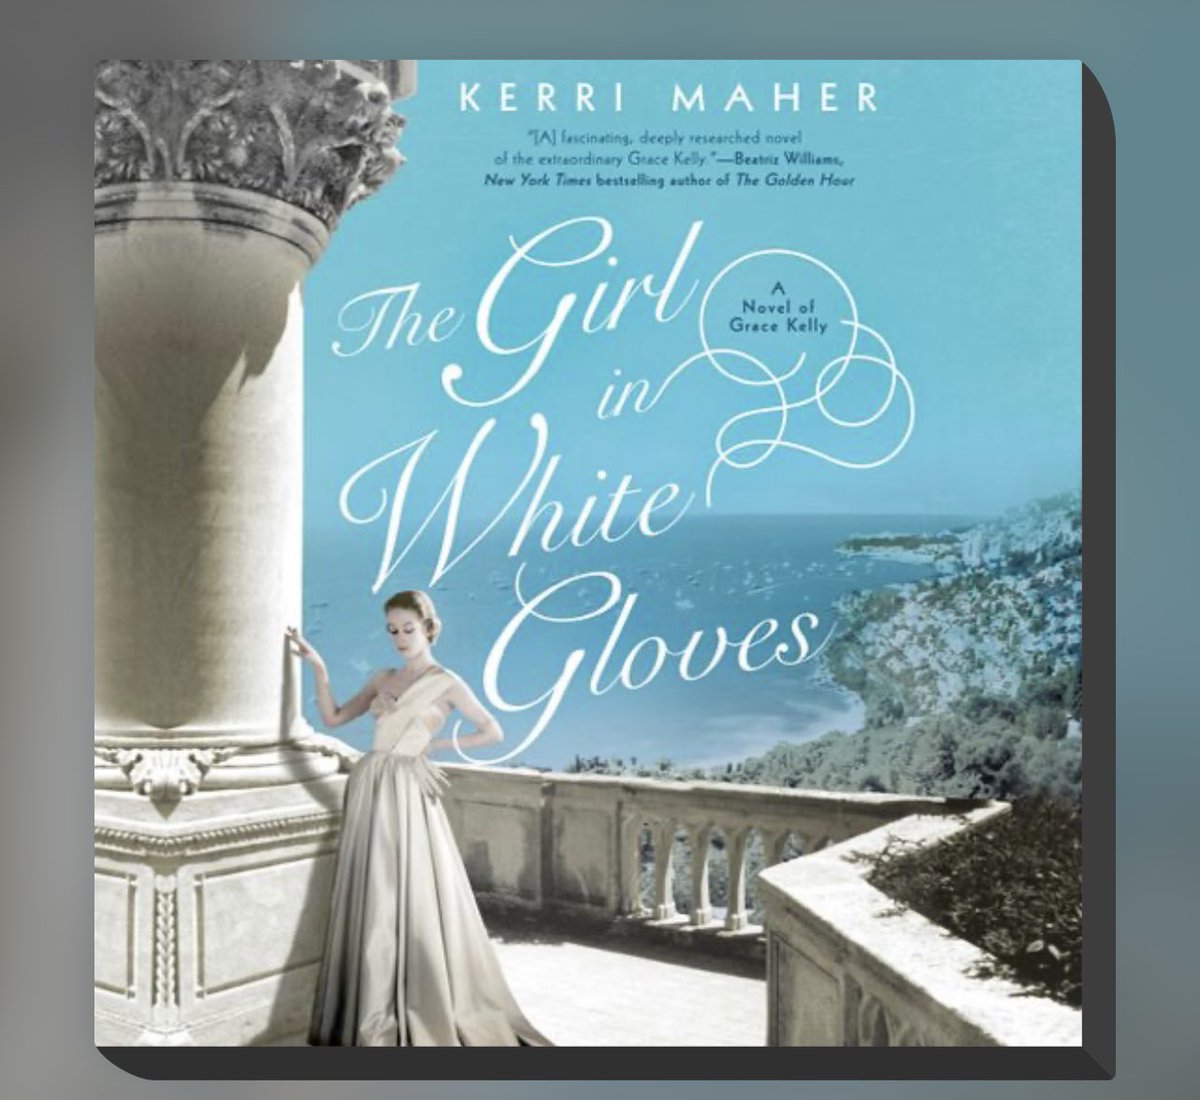 Currently reading “The Girl in the White Gloves” by @kerrimaherbooks